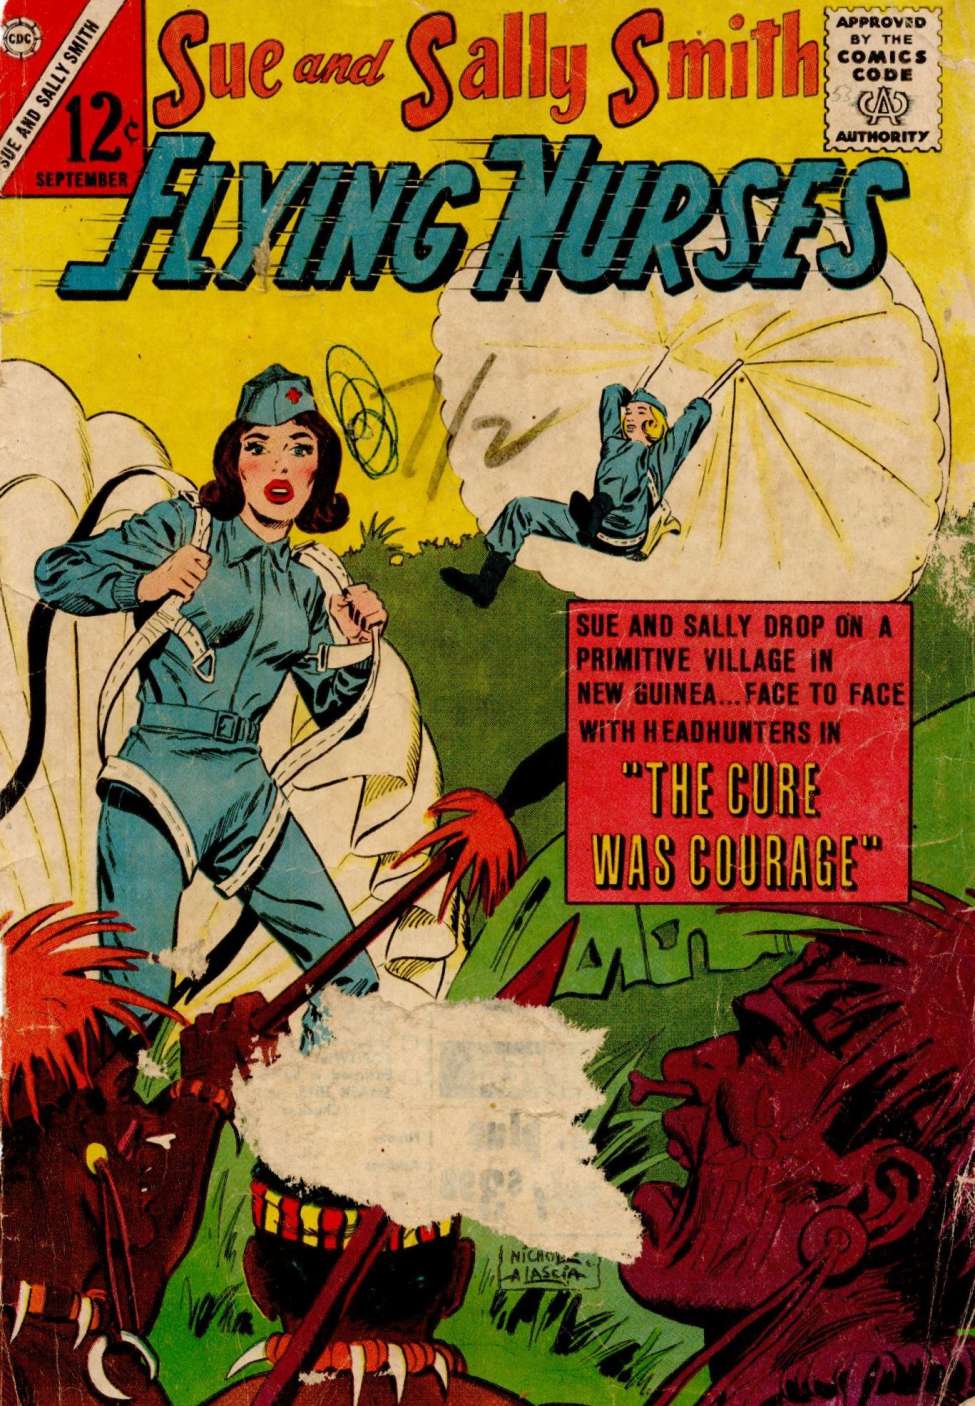 Comic Book Cover For Sue and Sally Smith, Flying Nurses 53